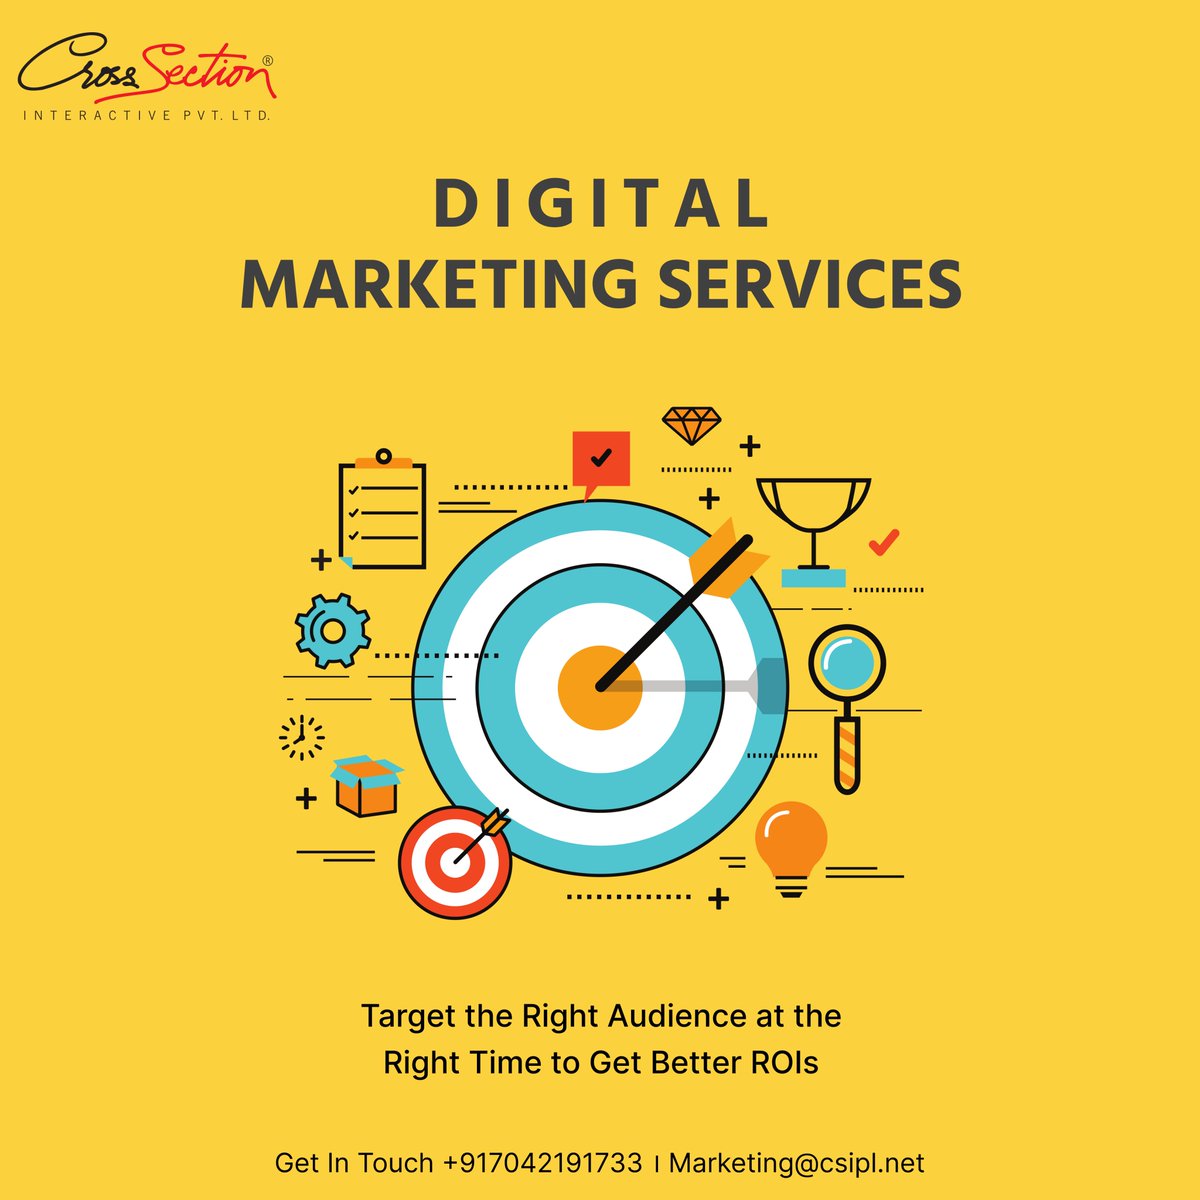 With #DigitalMarketing you can establish your #brand as an #industryleader.
A strong #digitalmarketingstrategy is essential for #successfulimplementation.
#CSIPL's #digitalsolutions can help you increase the value of your brand
Get affordable #SEO,#SEM,#PPC,#SMO& #EmailMarketing.